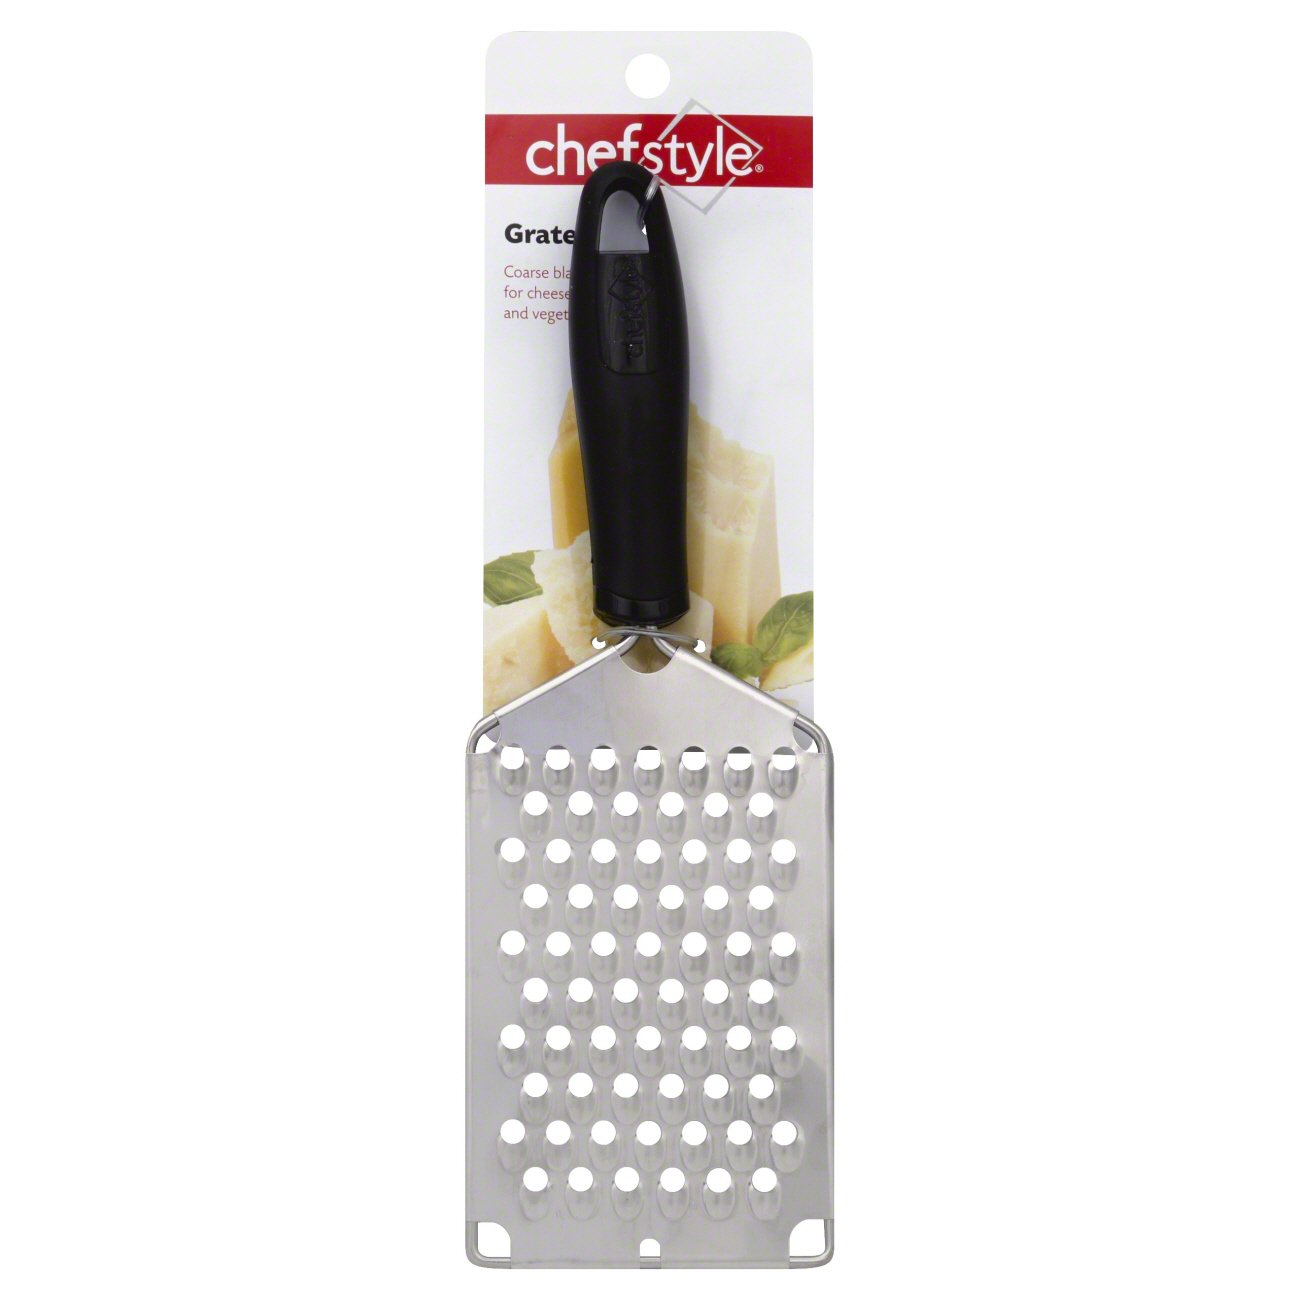 Zyliss Classic Cheese Grater - Shop Utensils & Gadgets at H-E-B